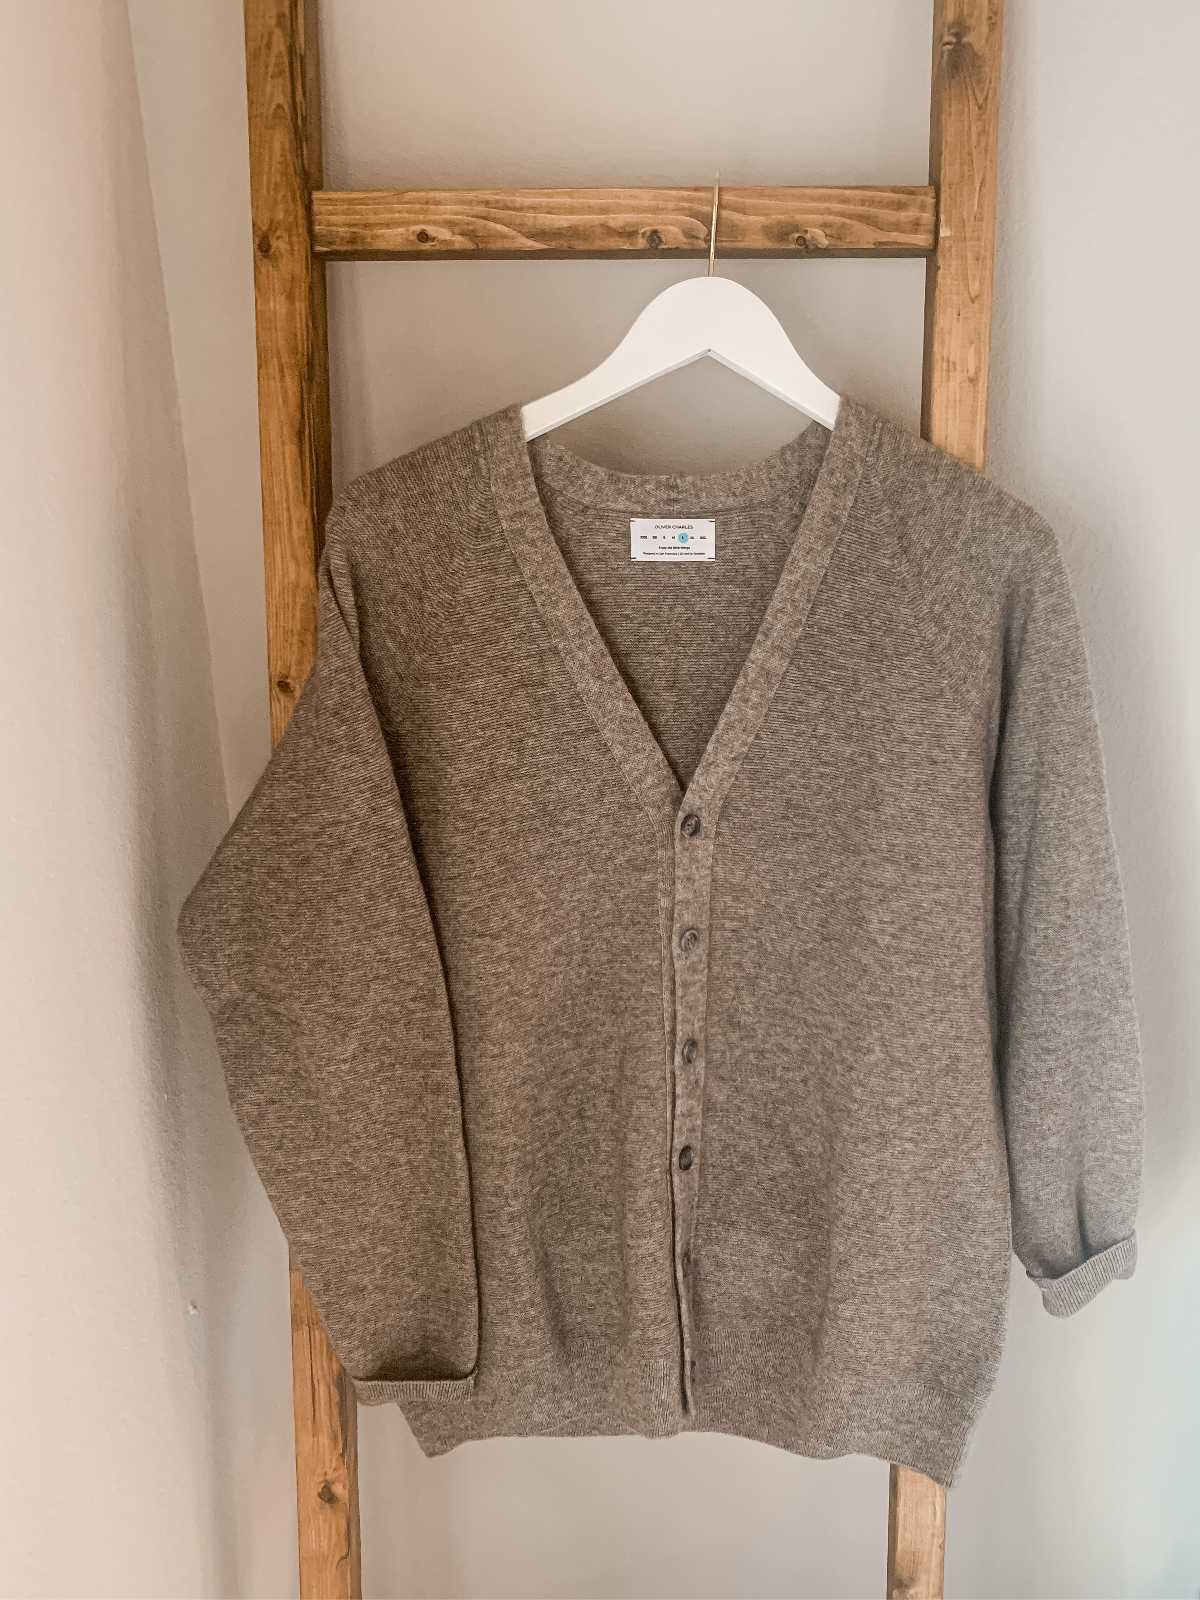 Oliver Charles - Elevate Your Wardrobe with the Luxurious Yak Wool Cardigan: Versatile Style for All-Season, Everyday Wear